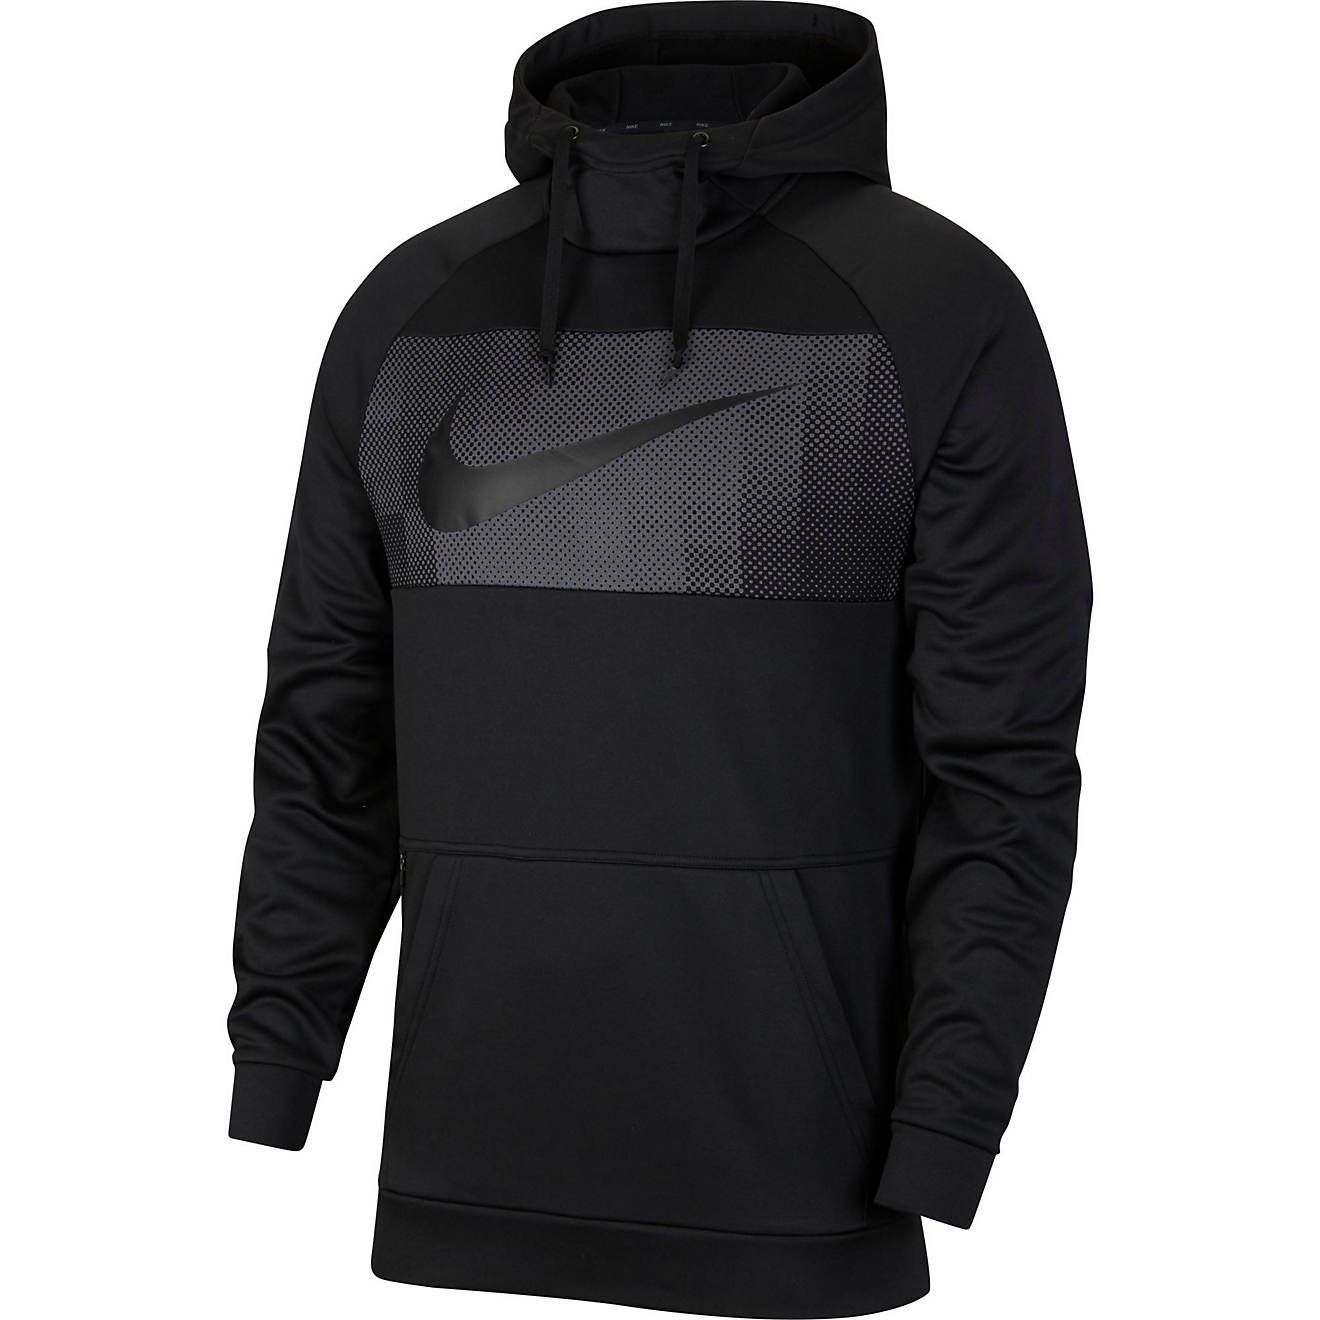 Nike Men's Therma Pullover Hoodie | Academy Sports + Outdoor Affiliate